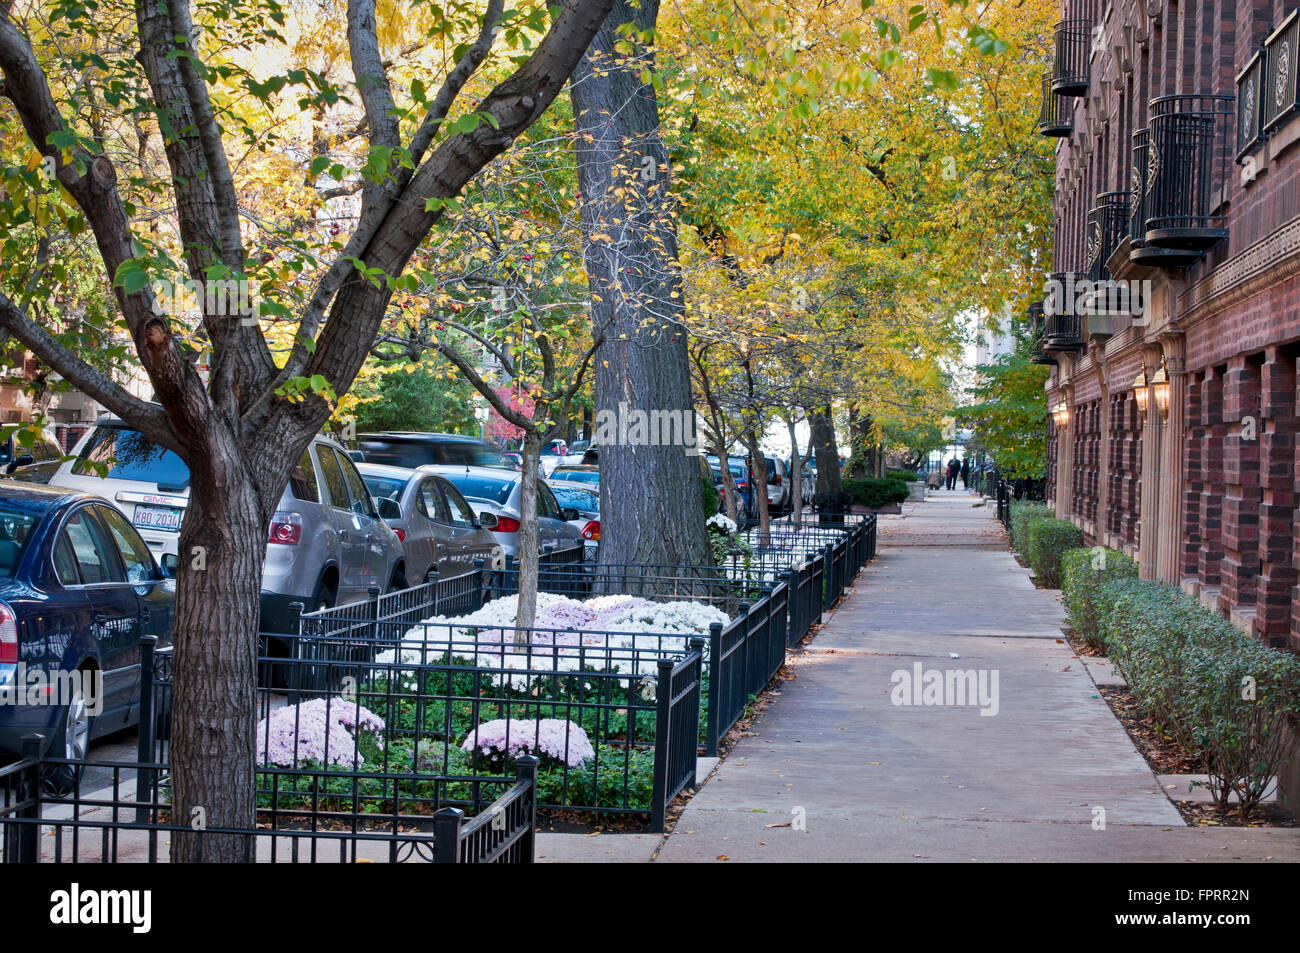 Autumn color on the city streets of an urban neighborhood in downtown Chicago, Illinois. Stock Photo